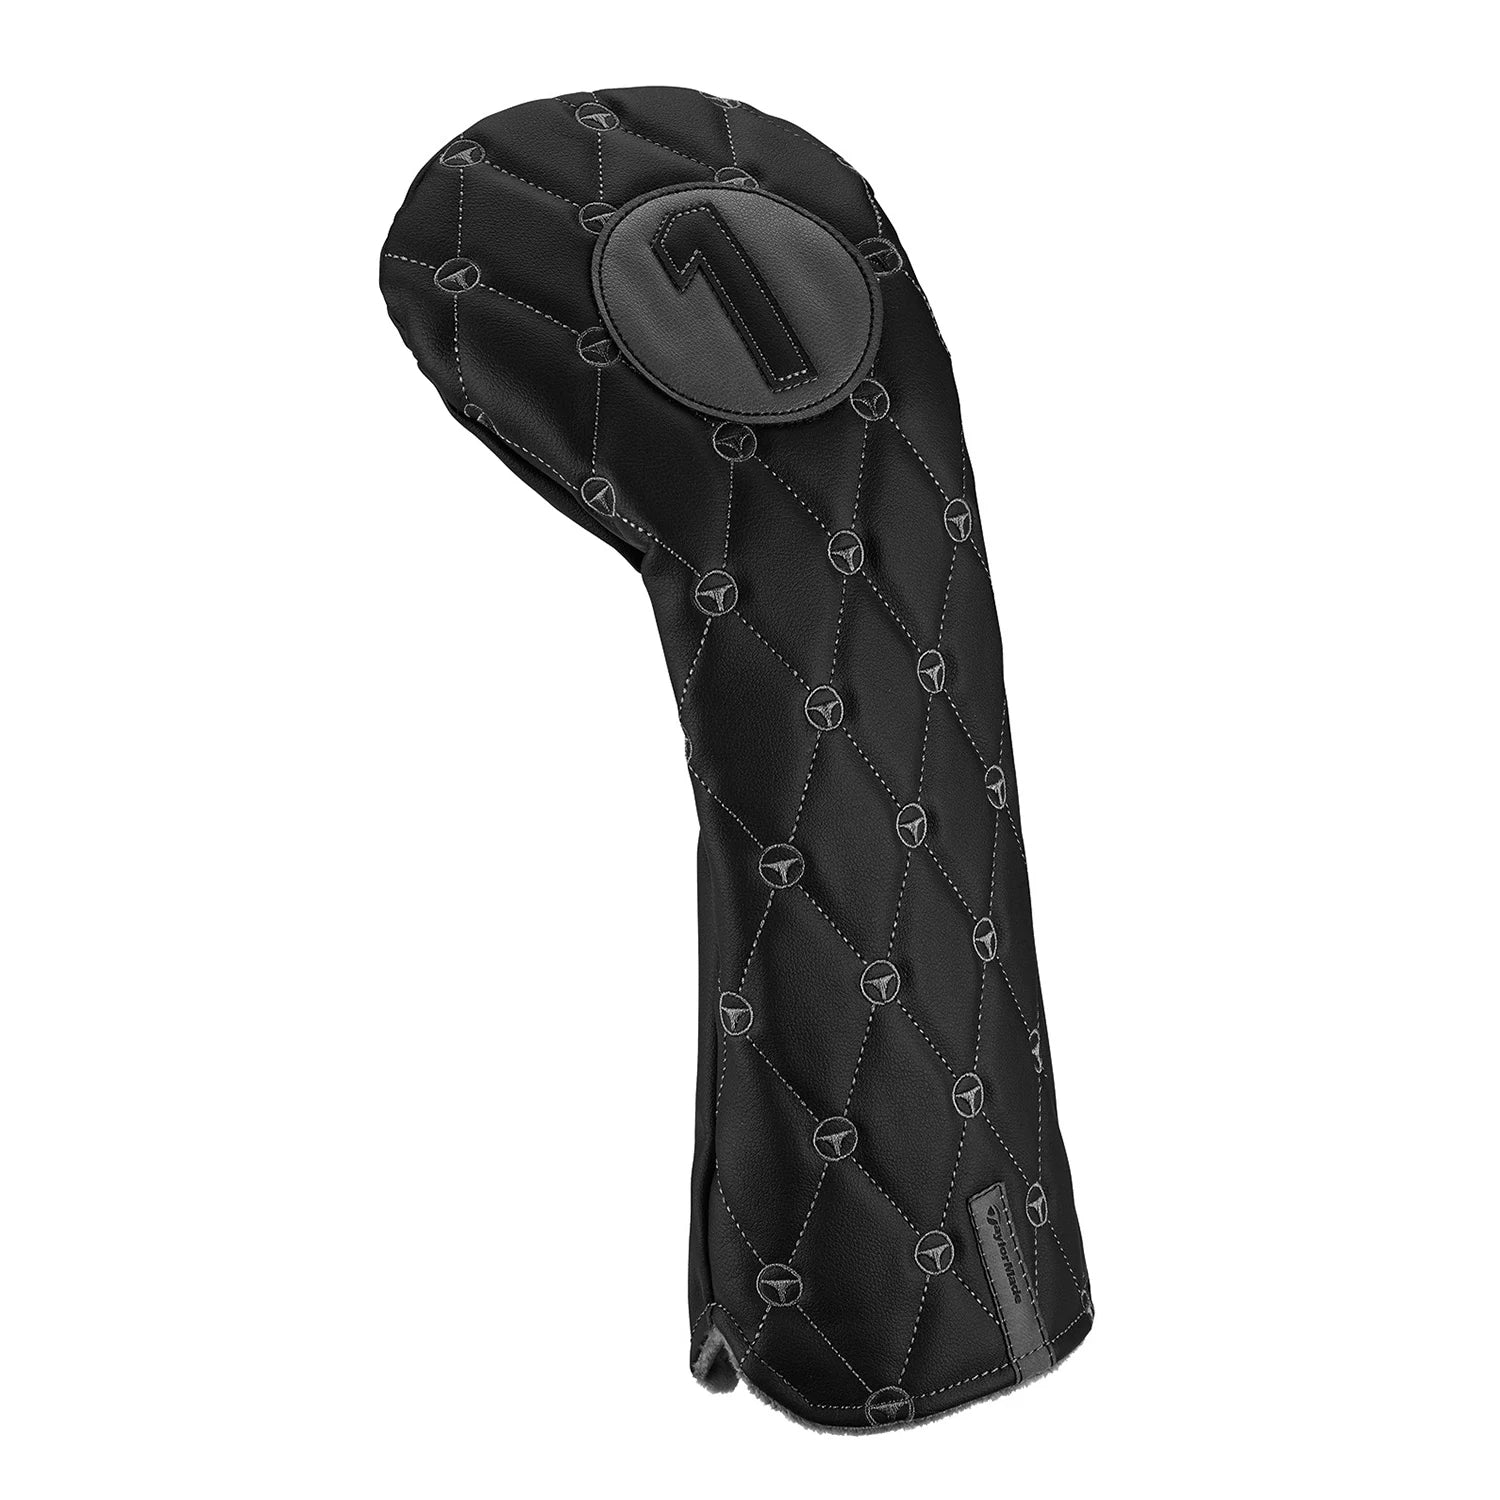 Taylormade 23 Driver Headcover Black